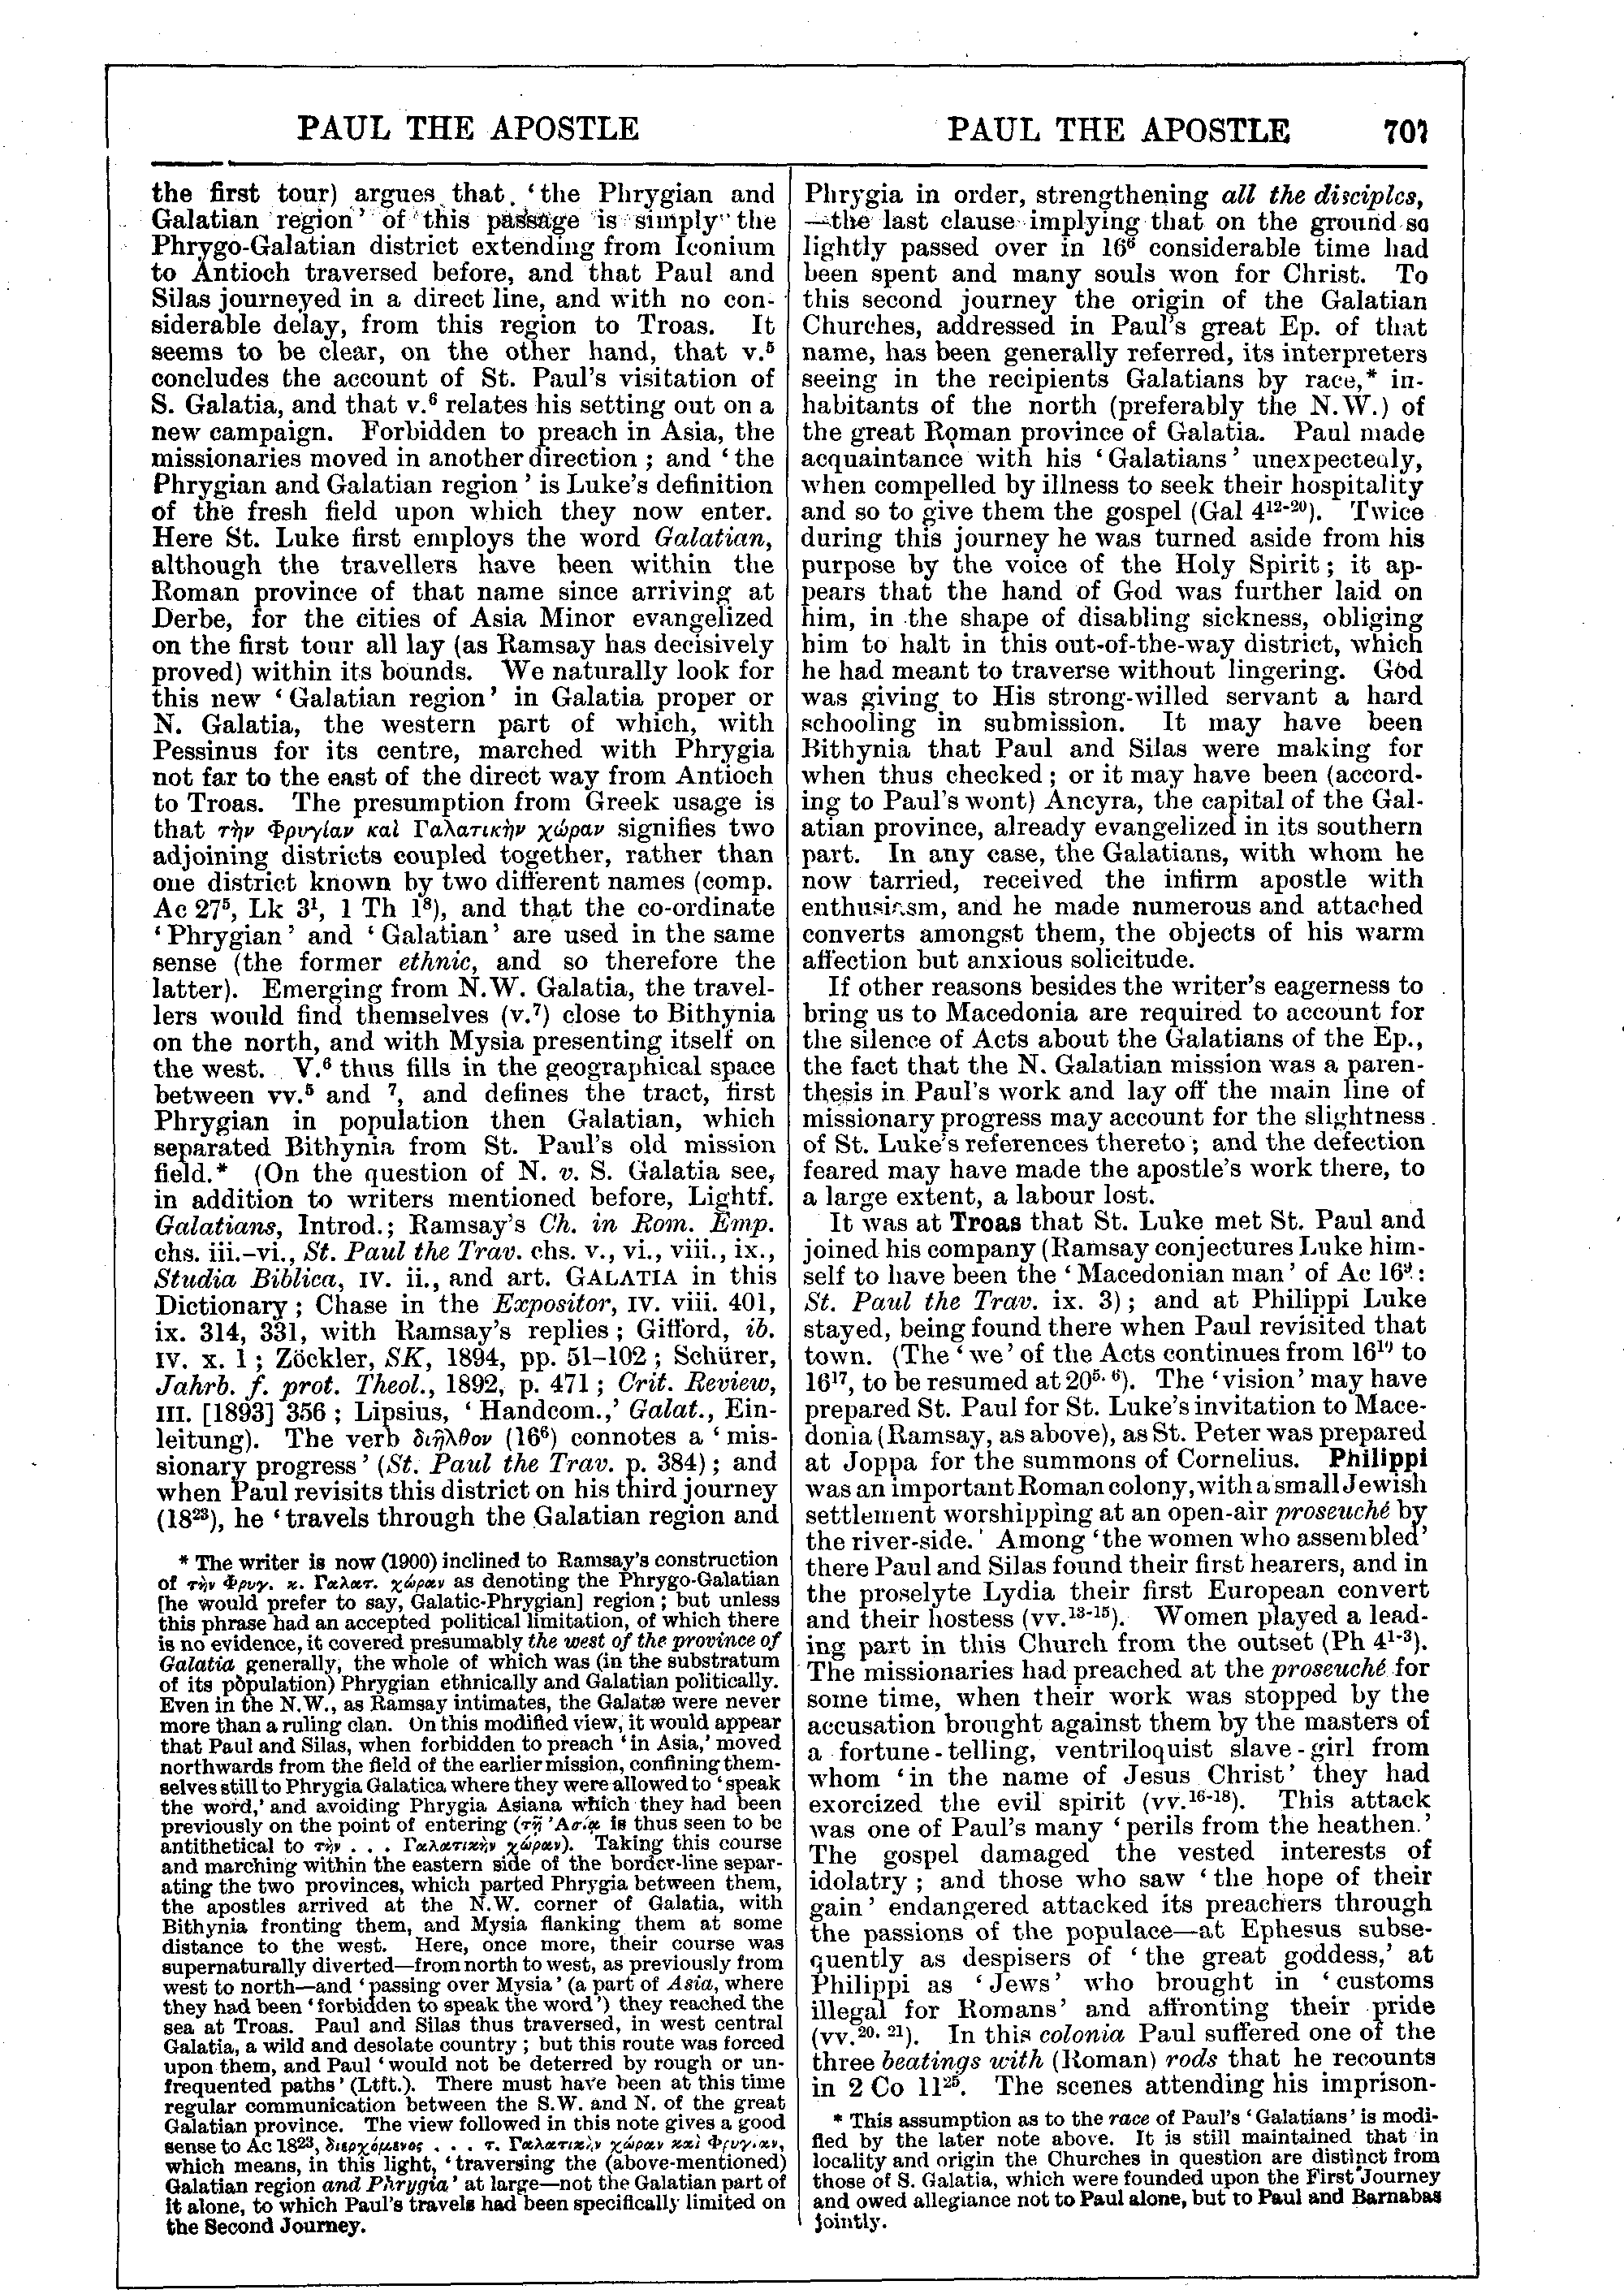 Image of page 707